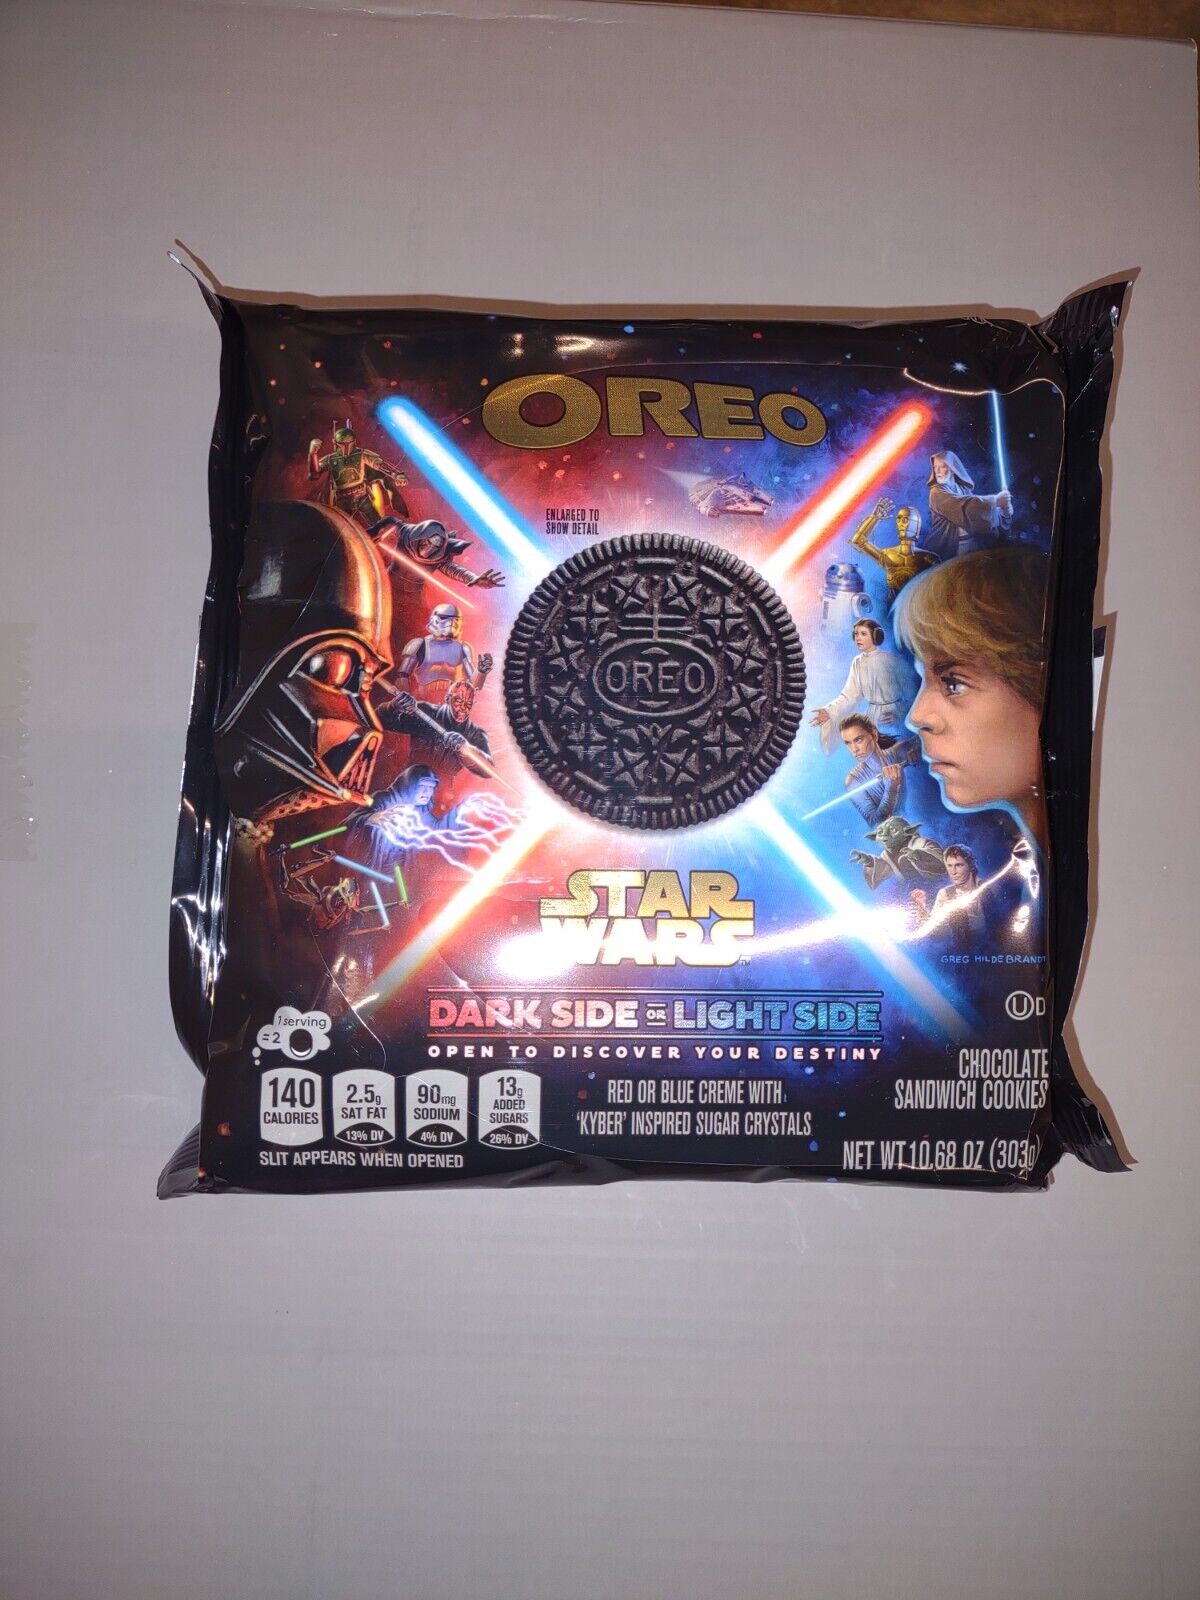 LINITED EDITION STAR WARS OREOS. WONT LAST LONG. SHIPS TODAY